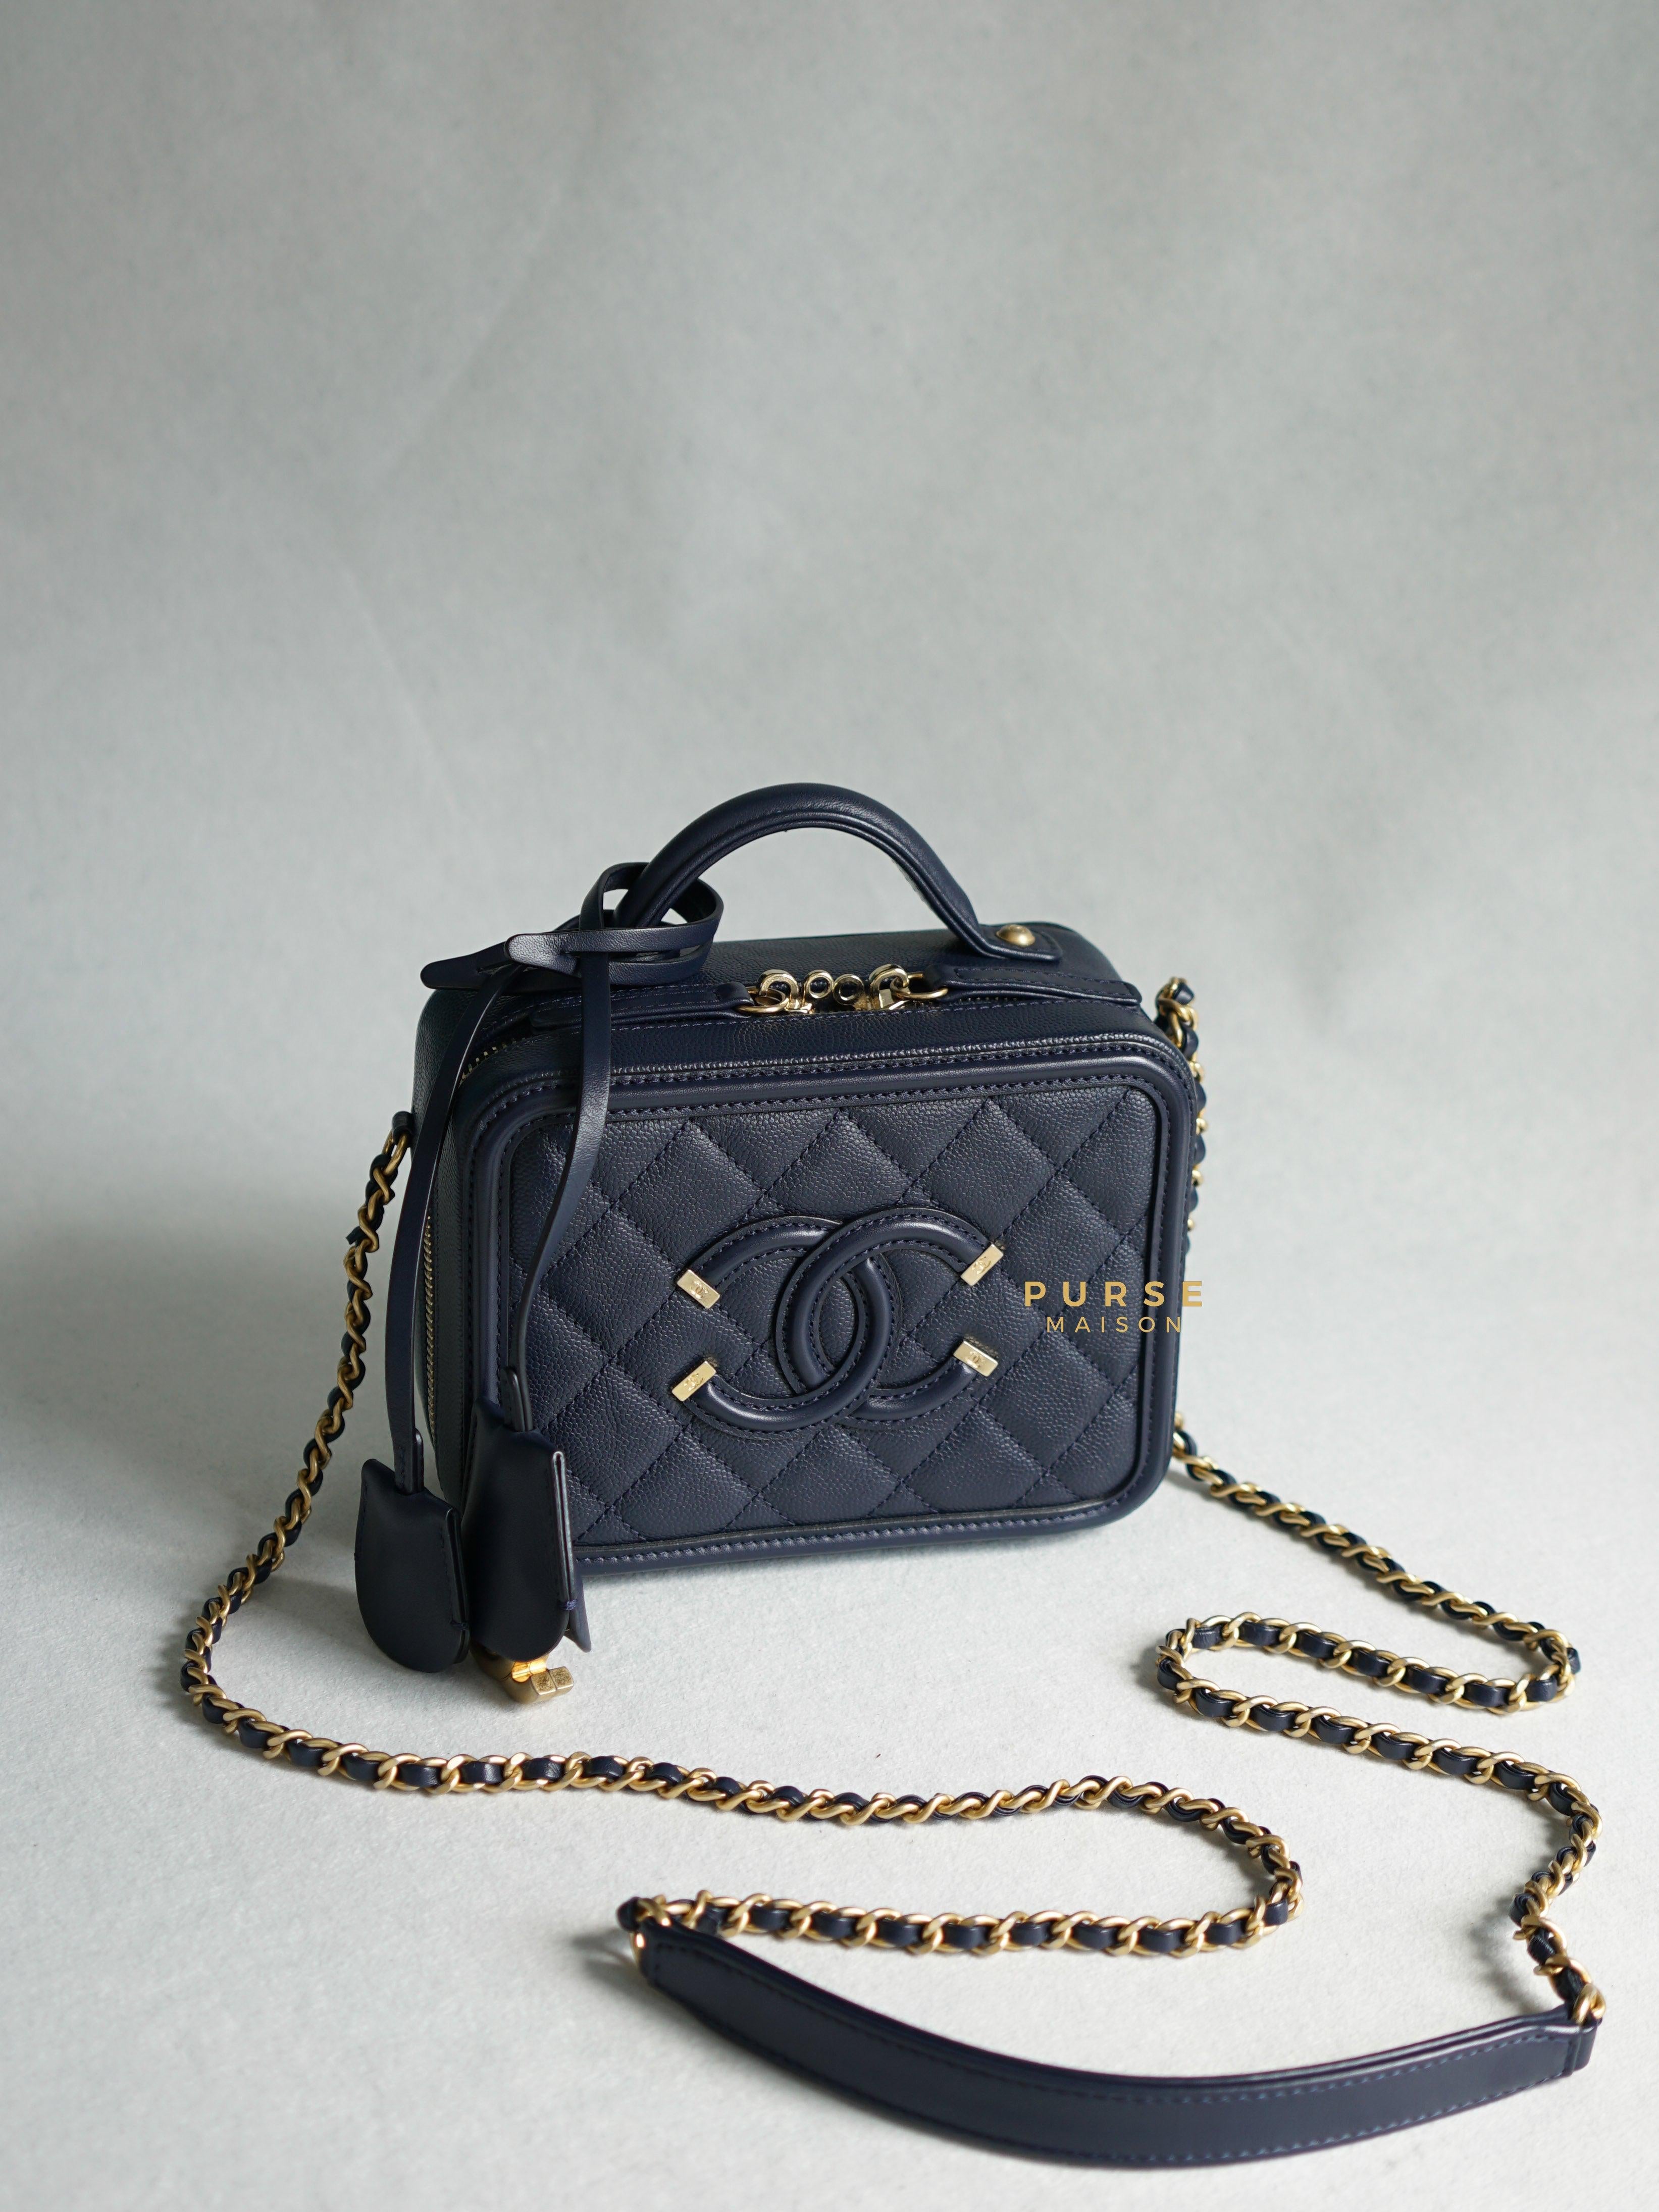 Chanel CC Filigree Small Vanity Navy Blue Caviar Leather in Aged Gold Hardware Series 25 | Purse Maison Luxury Bags Shop